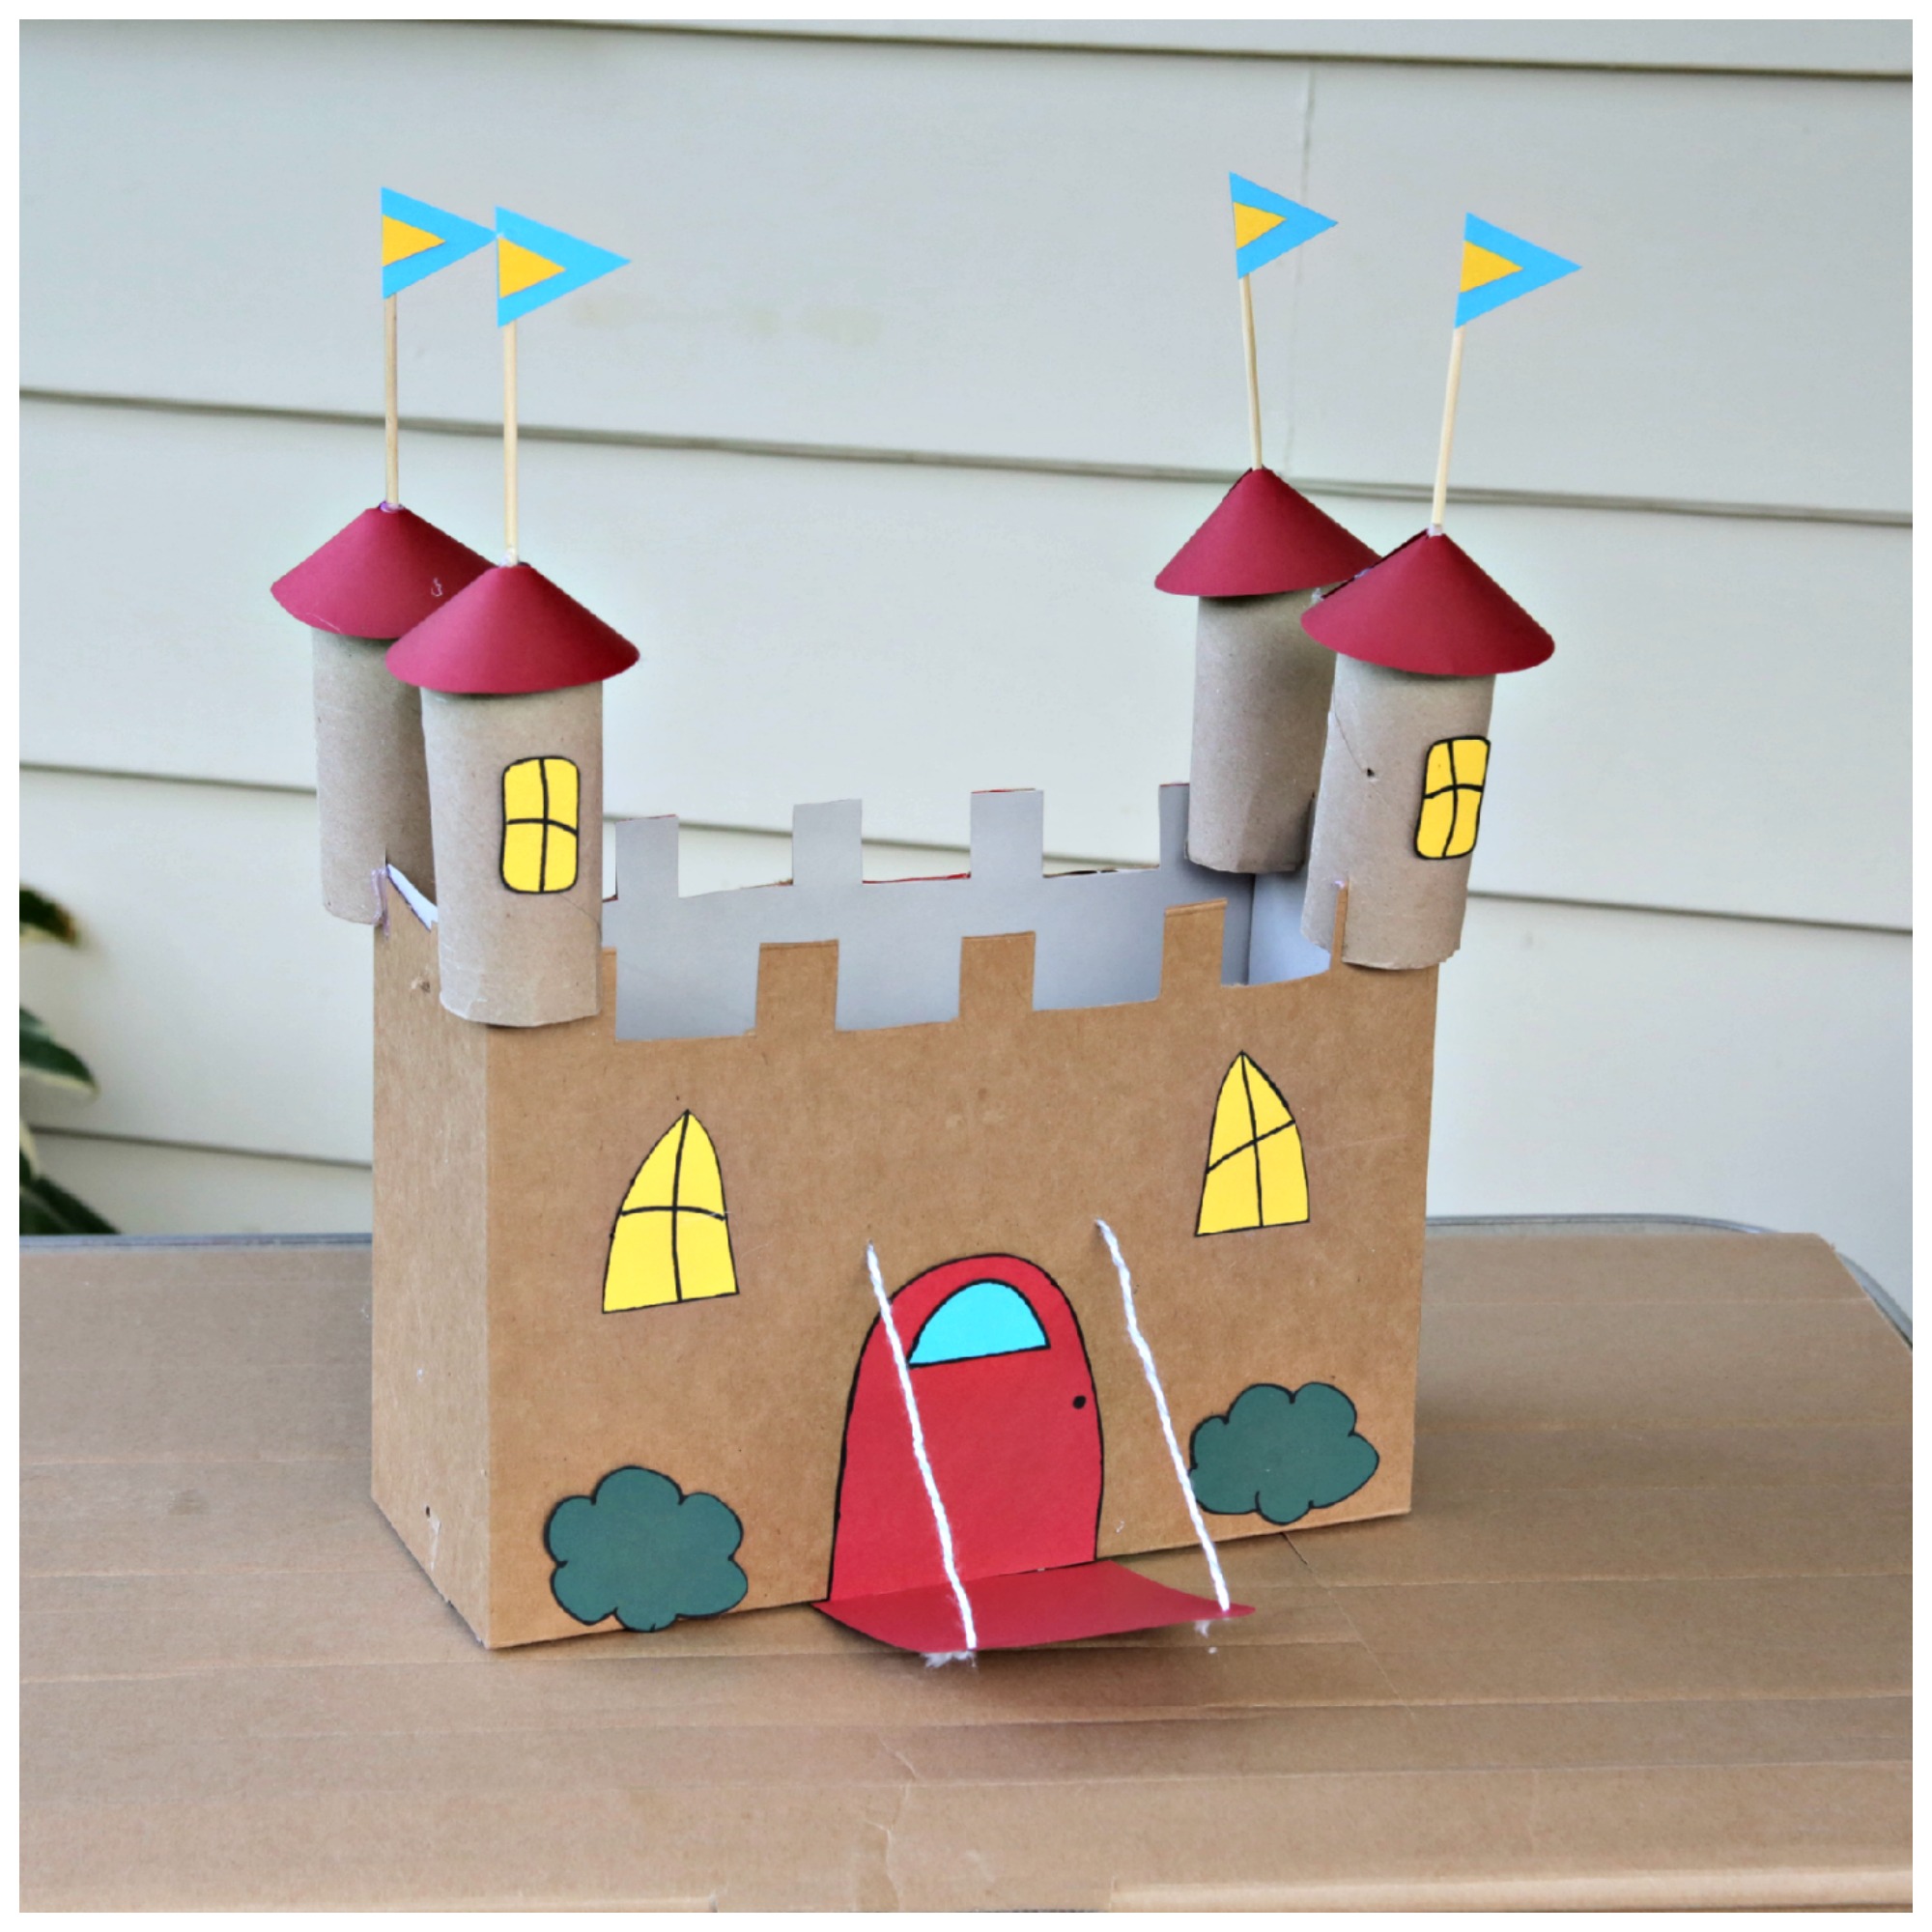 How To Make A Castle For Your Kids Using Recycled Cardboard HD Walls